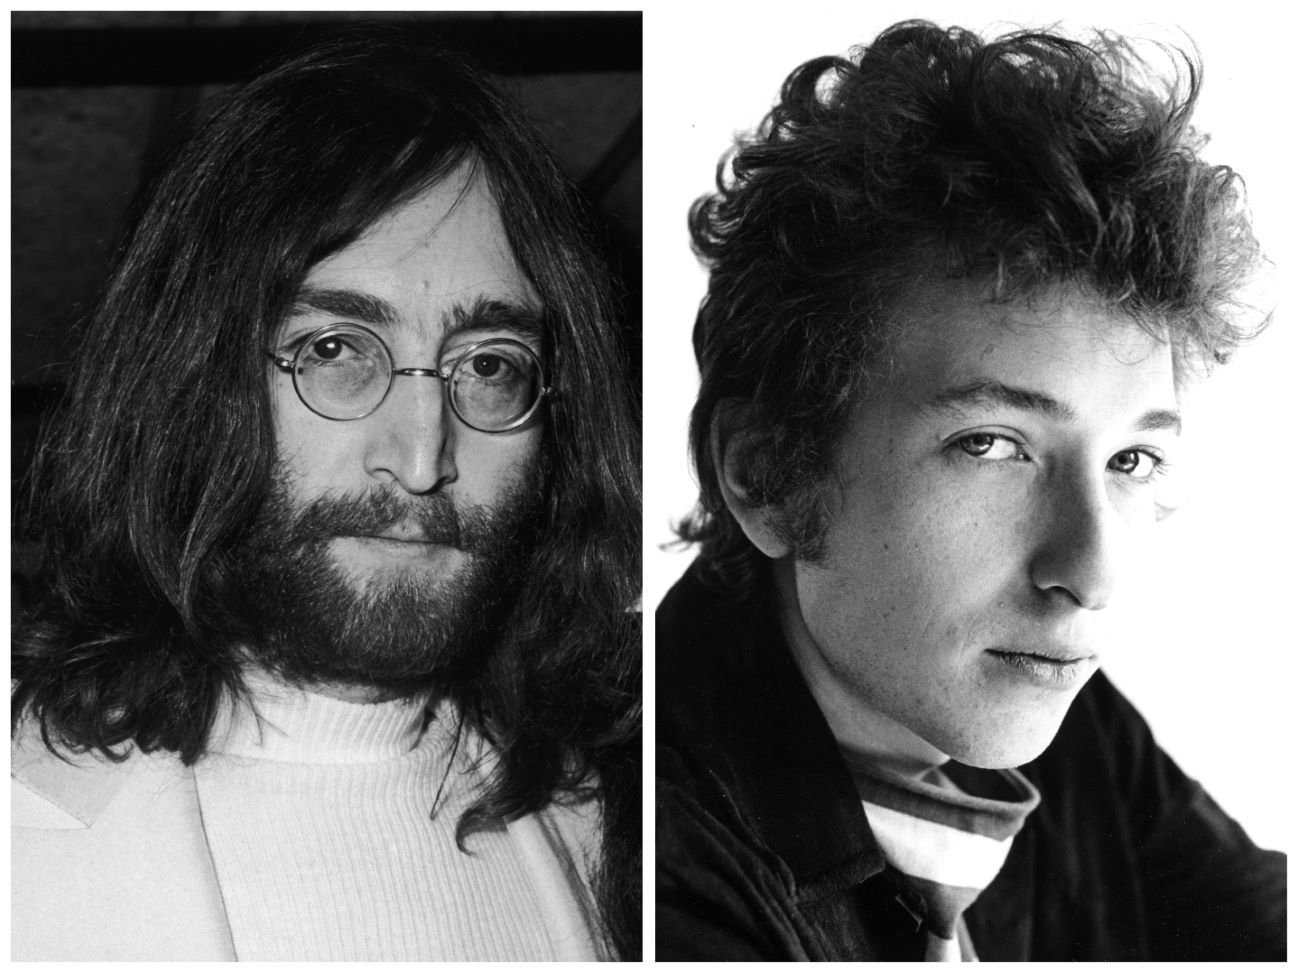 A black and white picture of John Lennon wearing glasses and a white turtleneck. Bob Dylan wears a striped turtleneck.